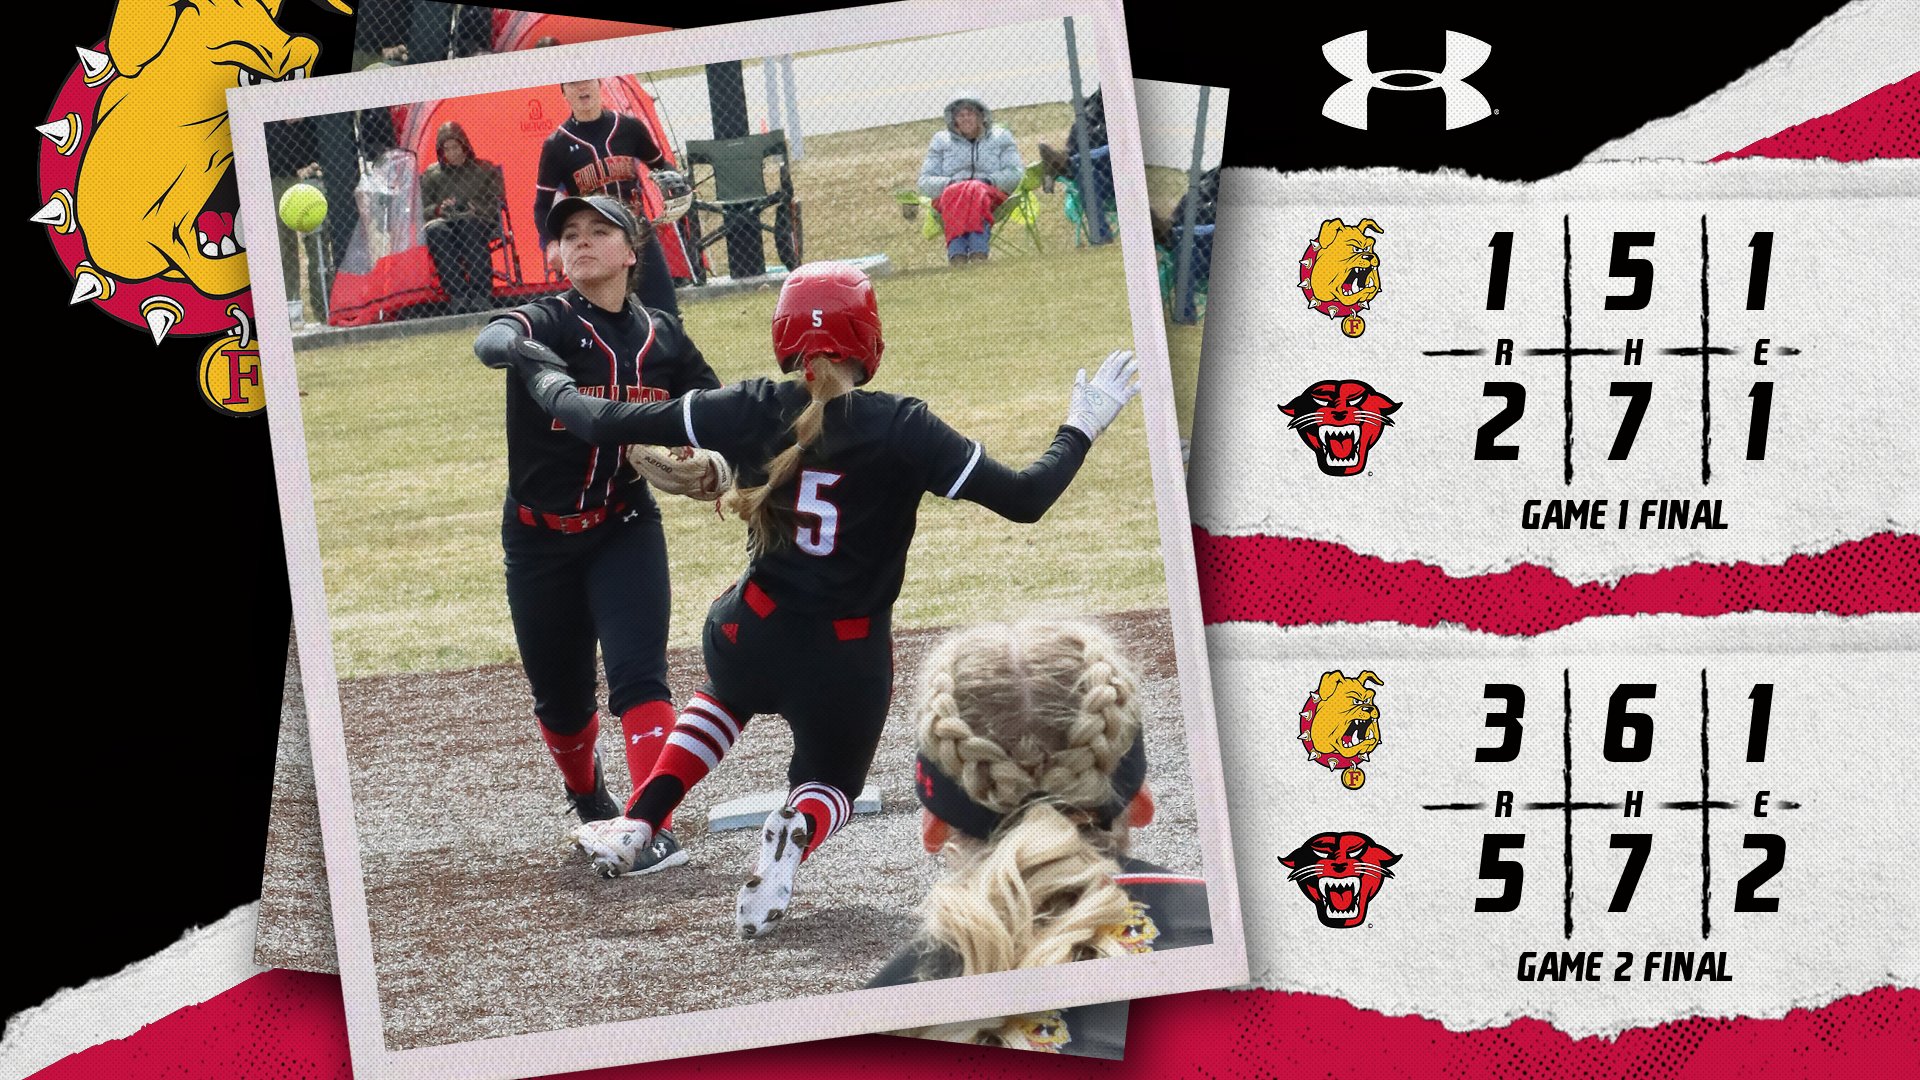 Bulldog Softball Drops Two Close Decisions To Davenport In League Home Doubleheader